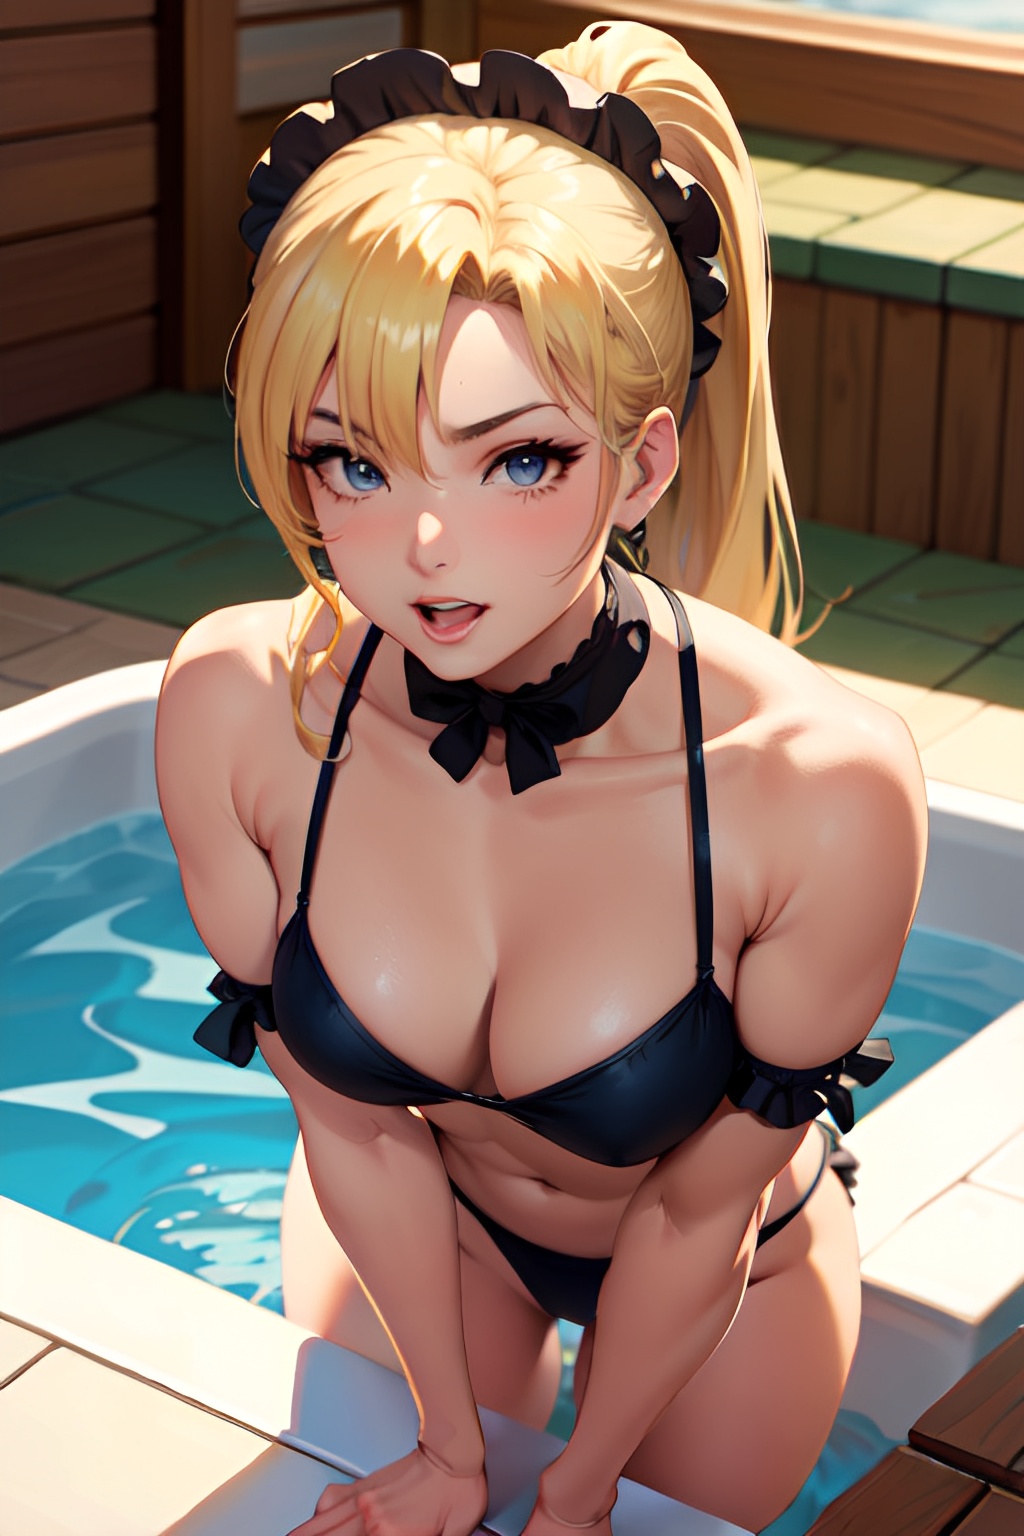 1024px x 1536px - Anime Muscular Small Tits 60s Age Seductive Face Blonde Ponytail Hair Style  Light Skin Comic Hot Tub Close Up View Bending Over Maid  3668443666772524754 - AI Hentai